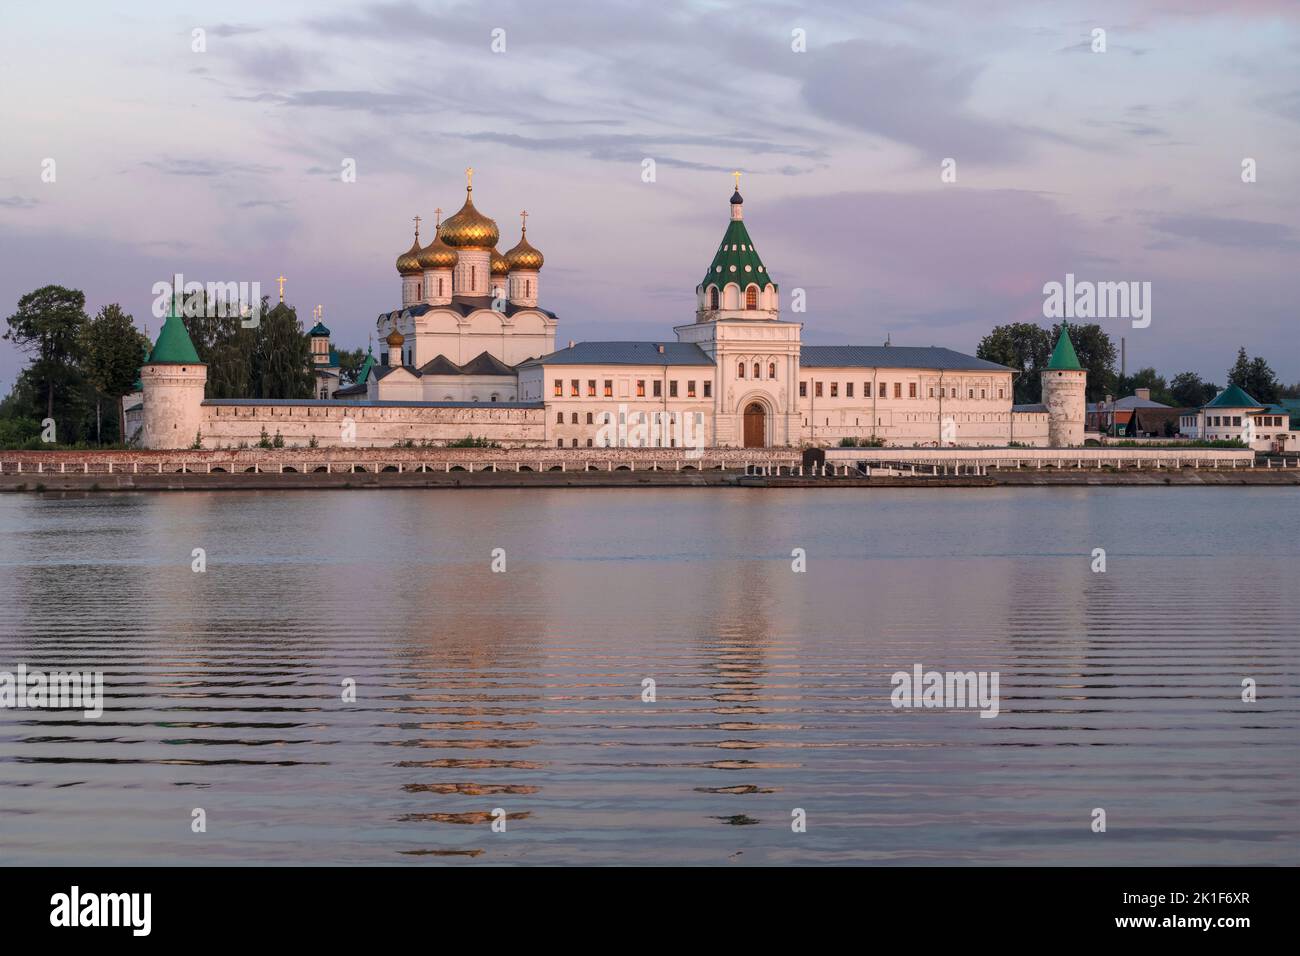 View of the ancient Holy Trinity Ipatiev Monastery before dawn. Kostroma, Golden Ring of Russia Stock Photo